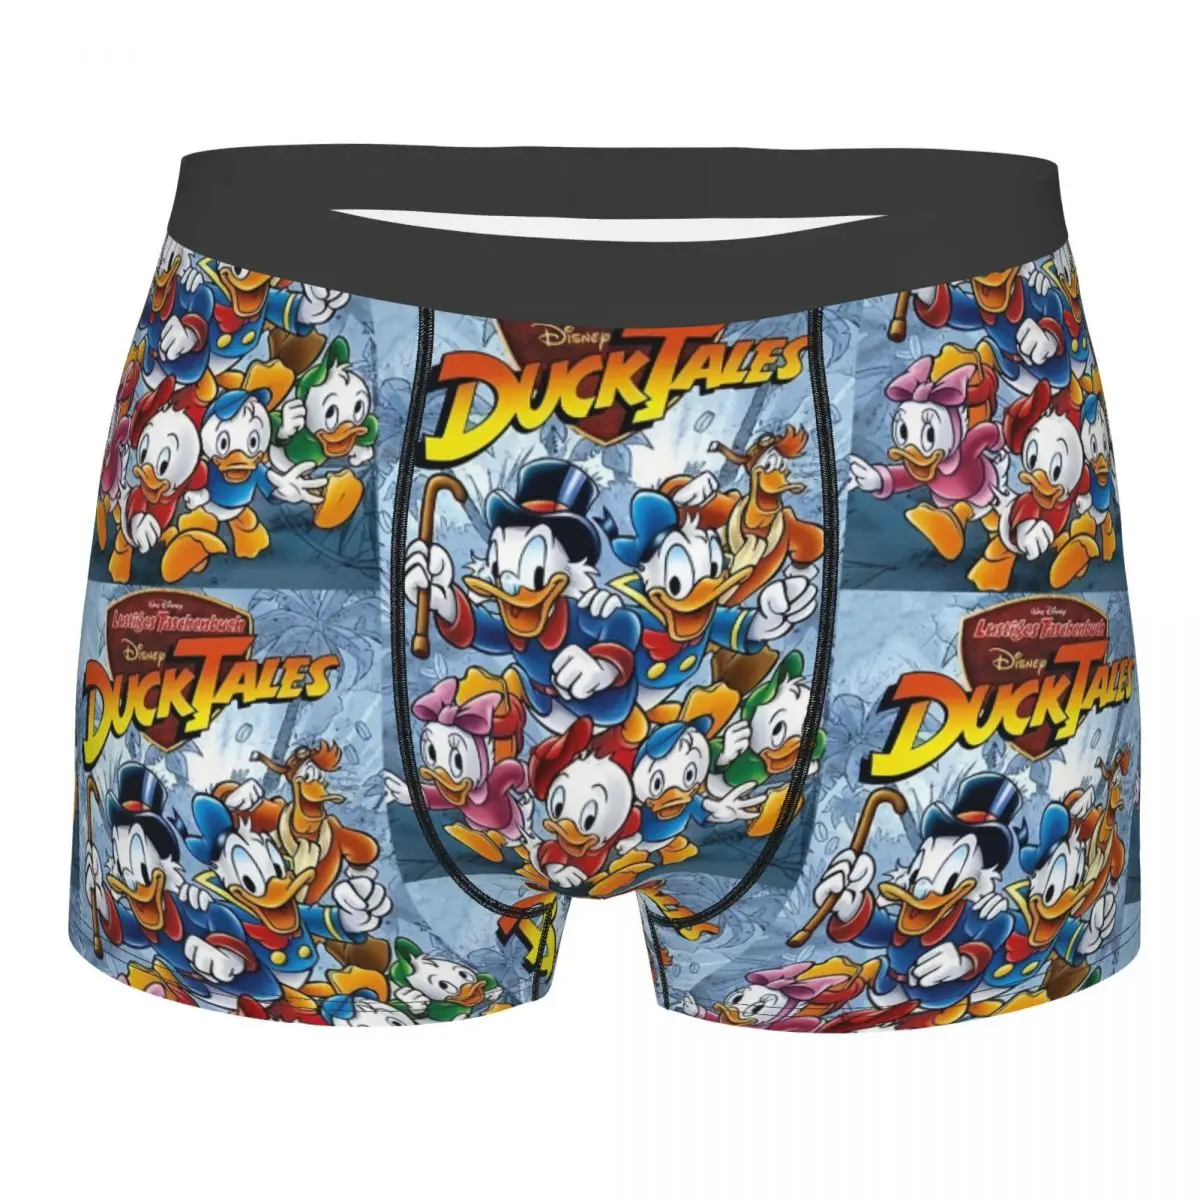 

Custom Disney The Mickey Mouse And Donald Duck Boxers Shorts Men's Cartoon Briefs Underwear Novelty Underpants